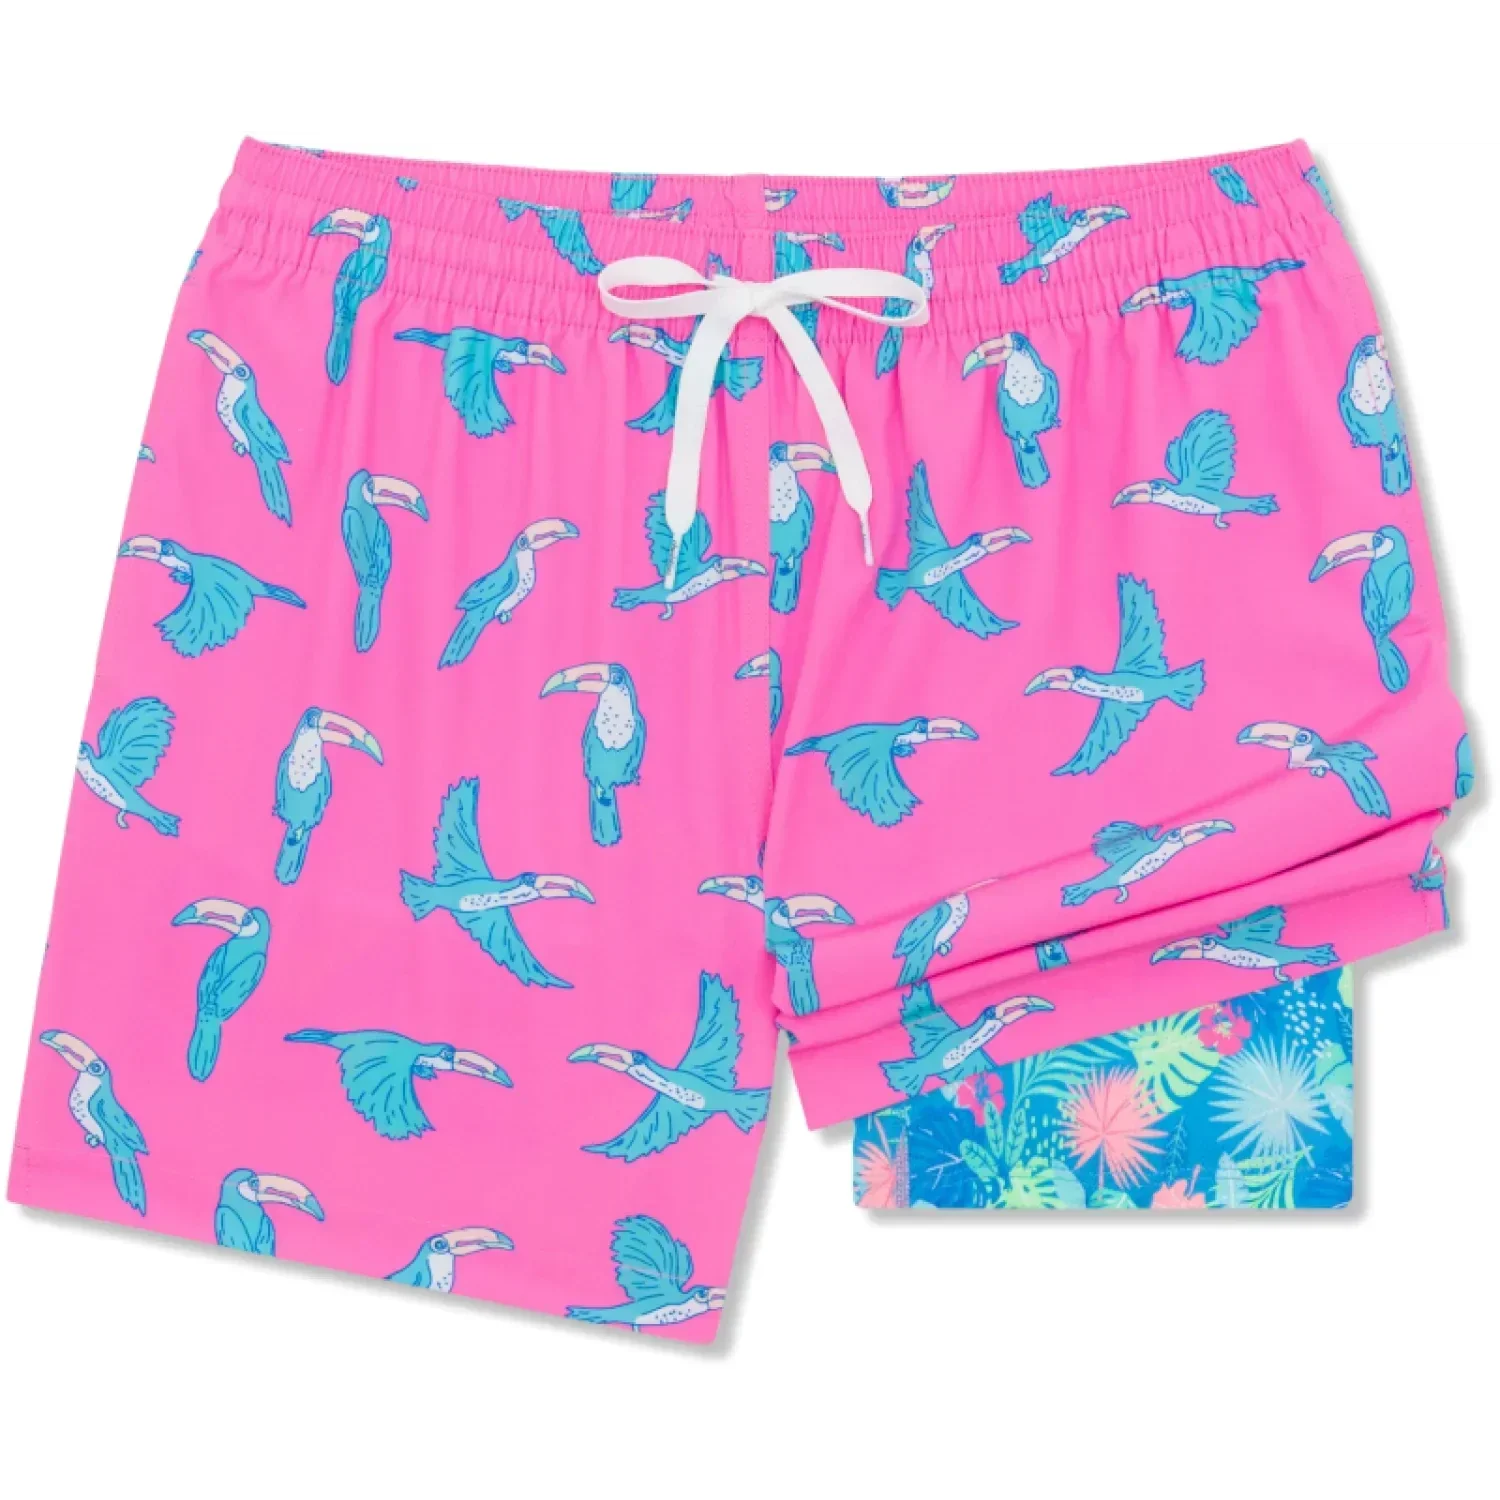 Chubbies 01. MENS APPAREL - MENS SHORTS - MENS SHORTS ACTIVE Men's The Classic Trunk - 5.5 in THE TOUCAN DO ITS